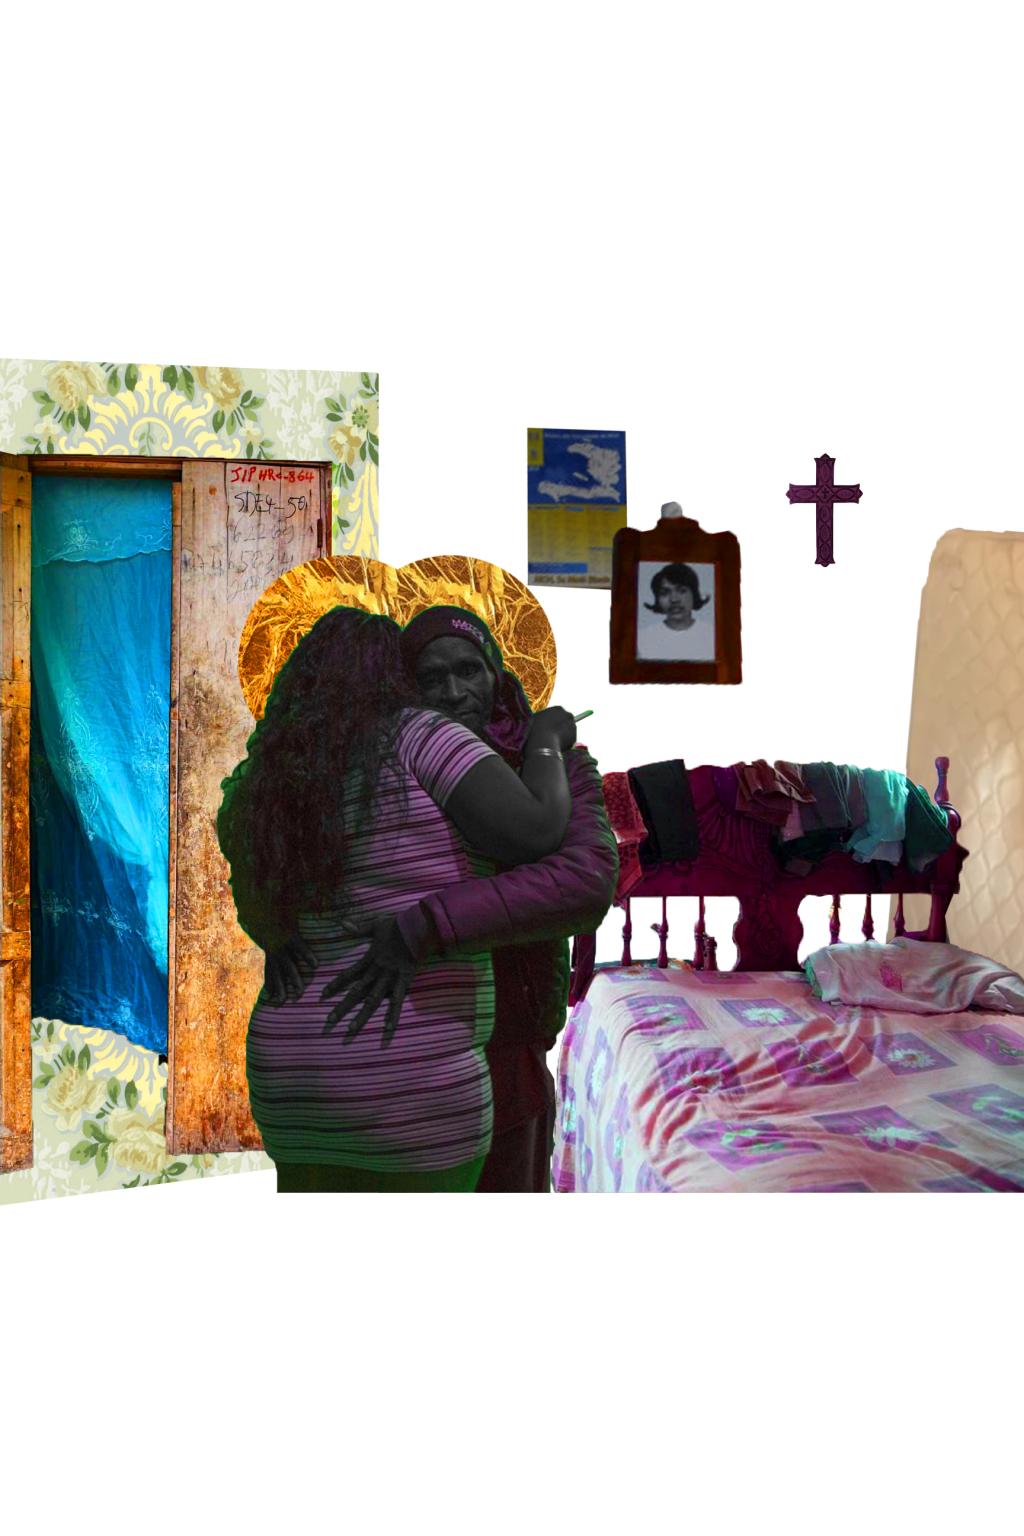 A black couple embrace in a room